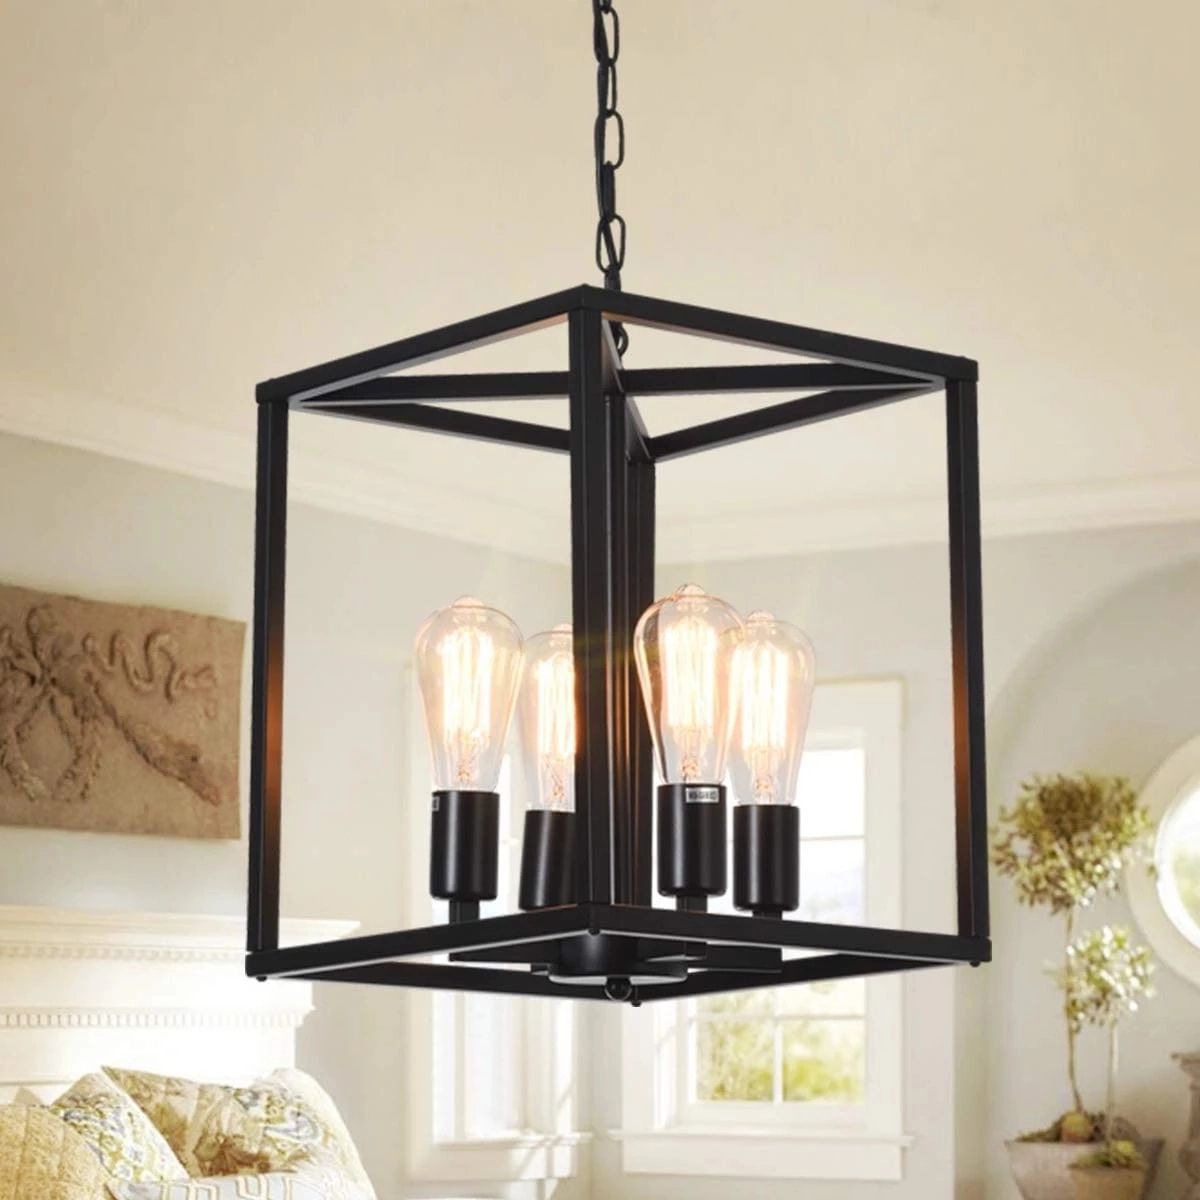 Preferred Steel Lantern Chandeliers In Industrial Metal Lantern Chandeliers 4 Light Adjustable Height Farmhouse  Ceiling Rustic Gold Kitchen Hanging Lighting Fixture – Pendant Lights –  Aliexpress (View 7 of 15)